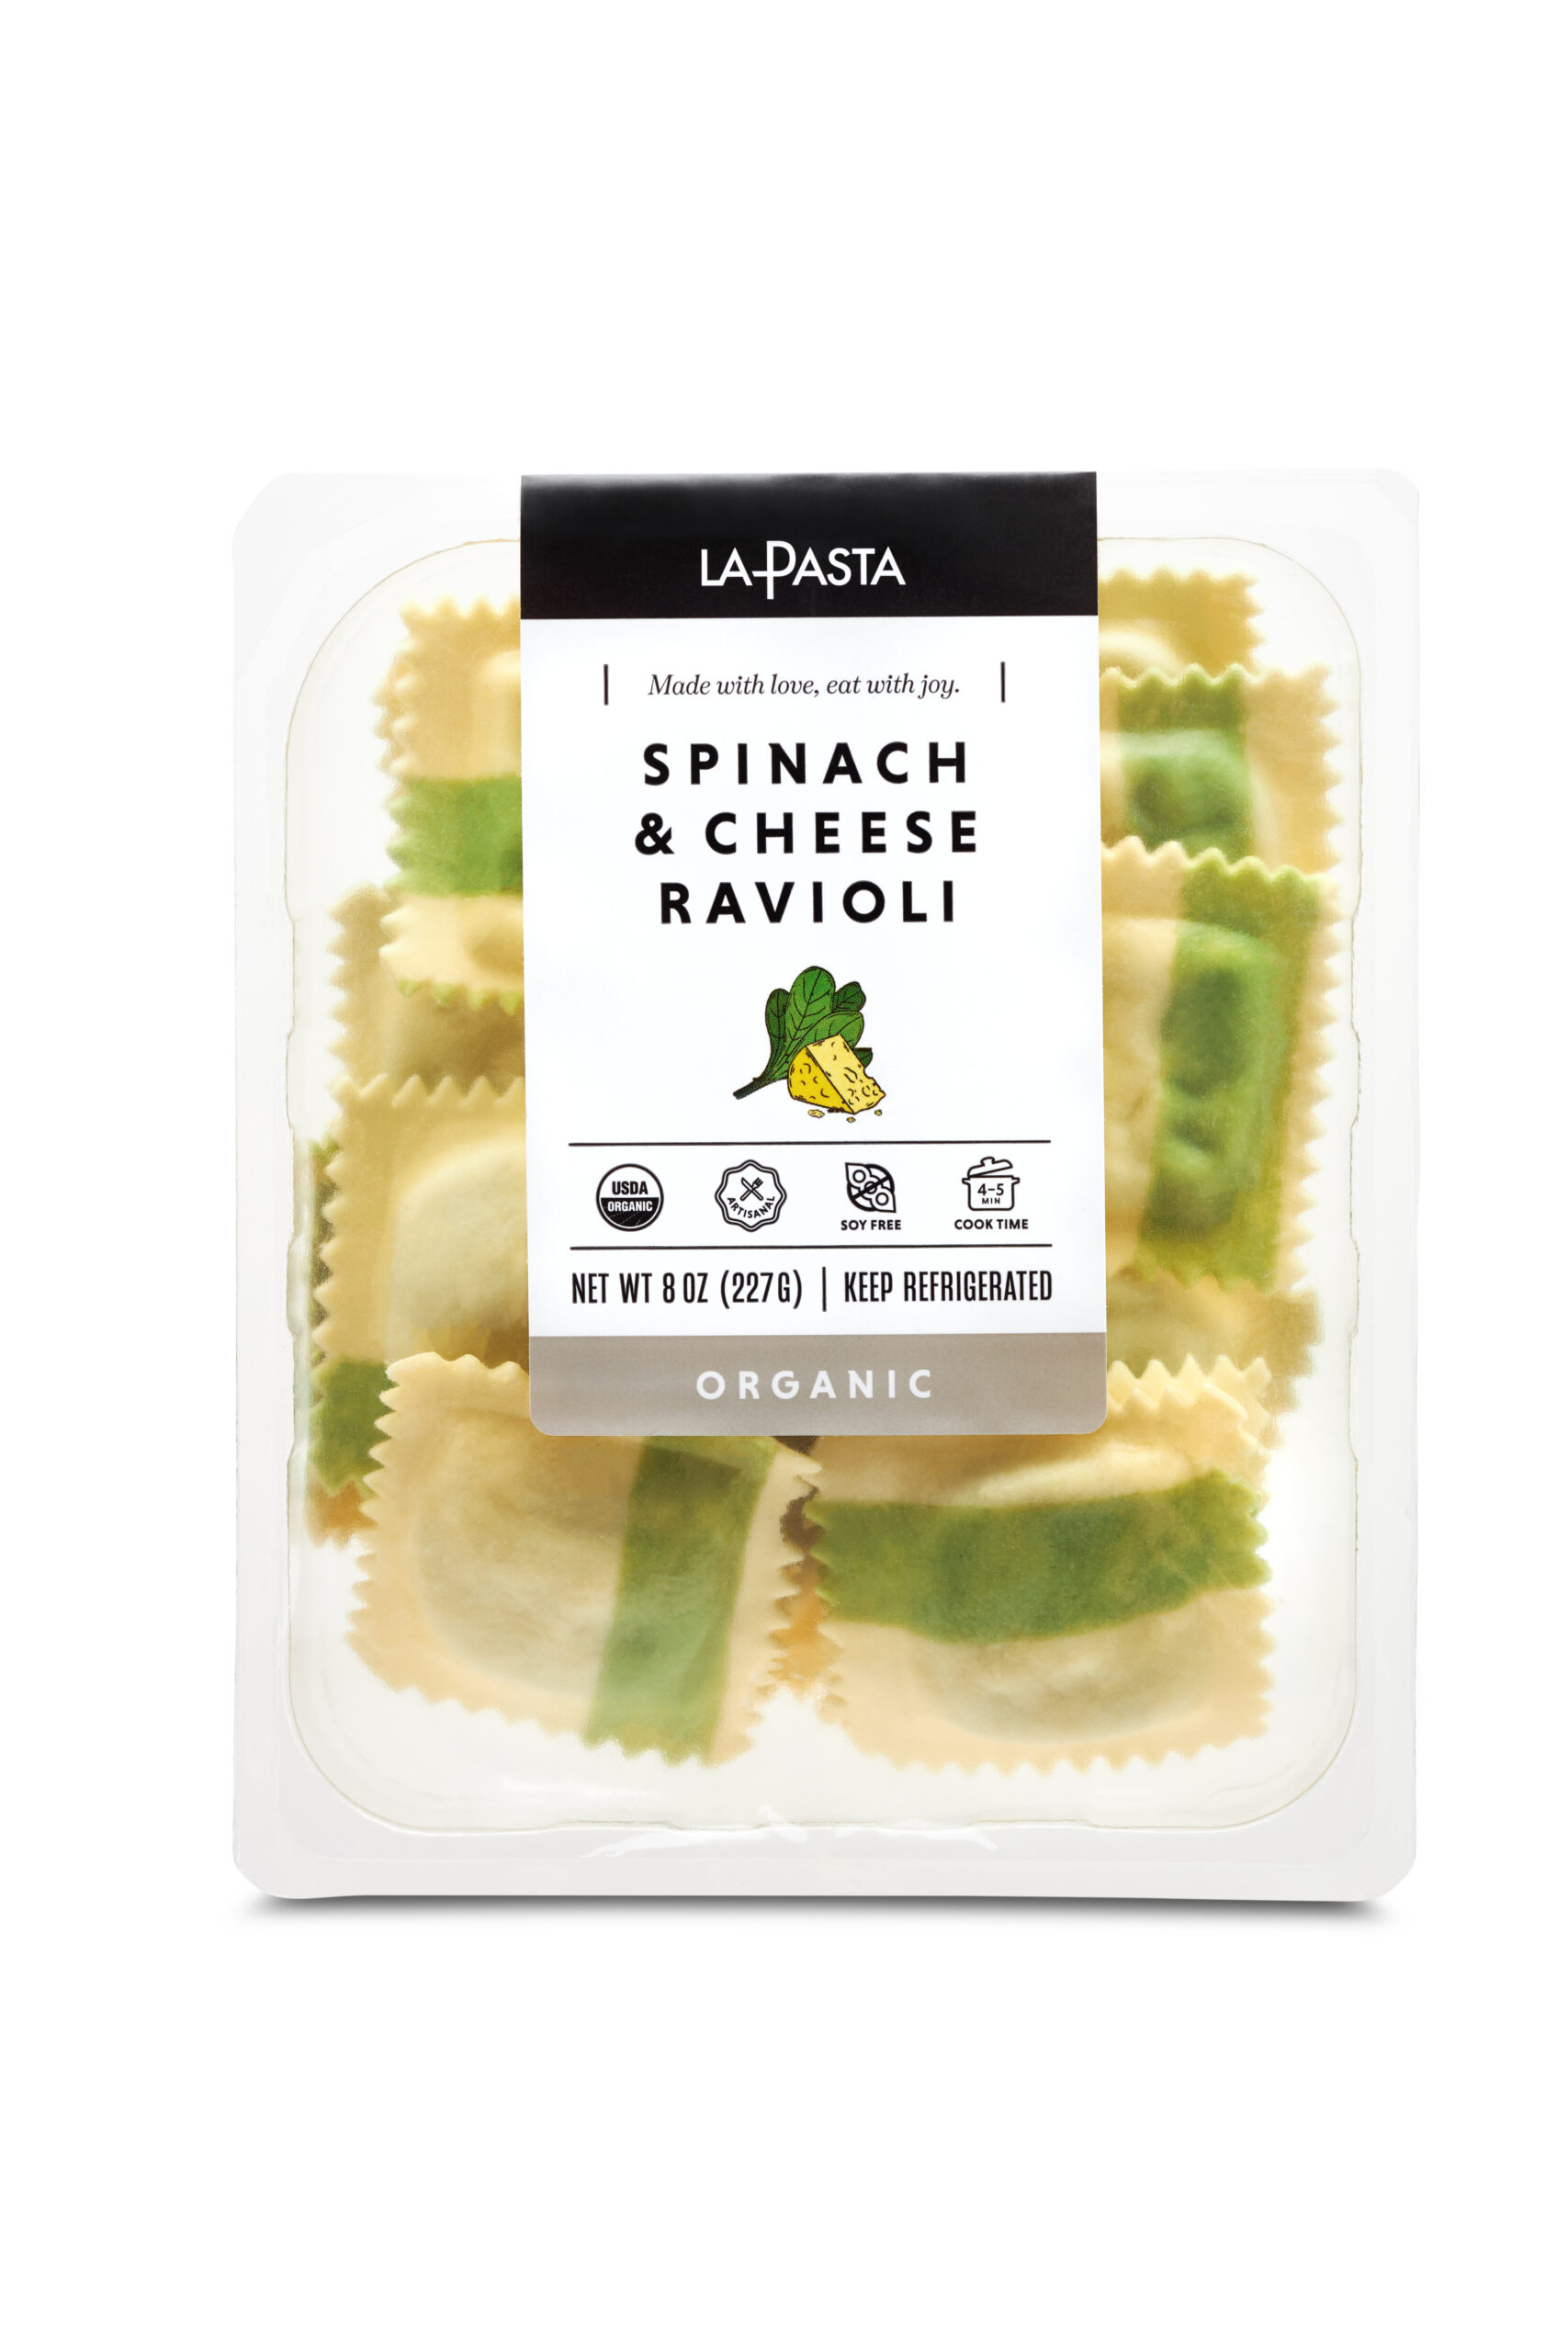 A package of spinach and cheese ravioli.